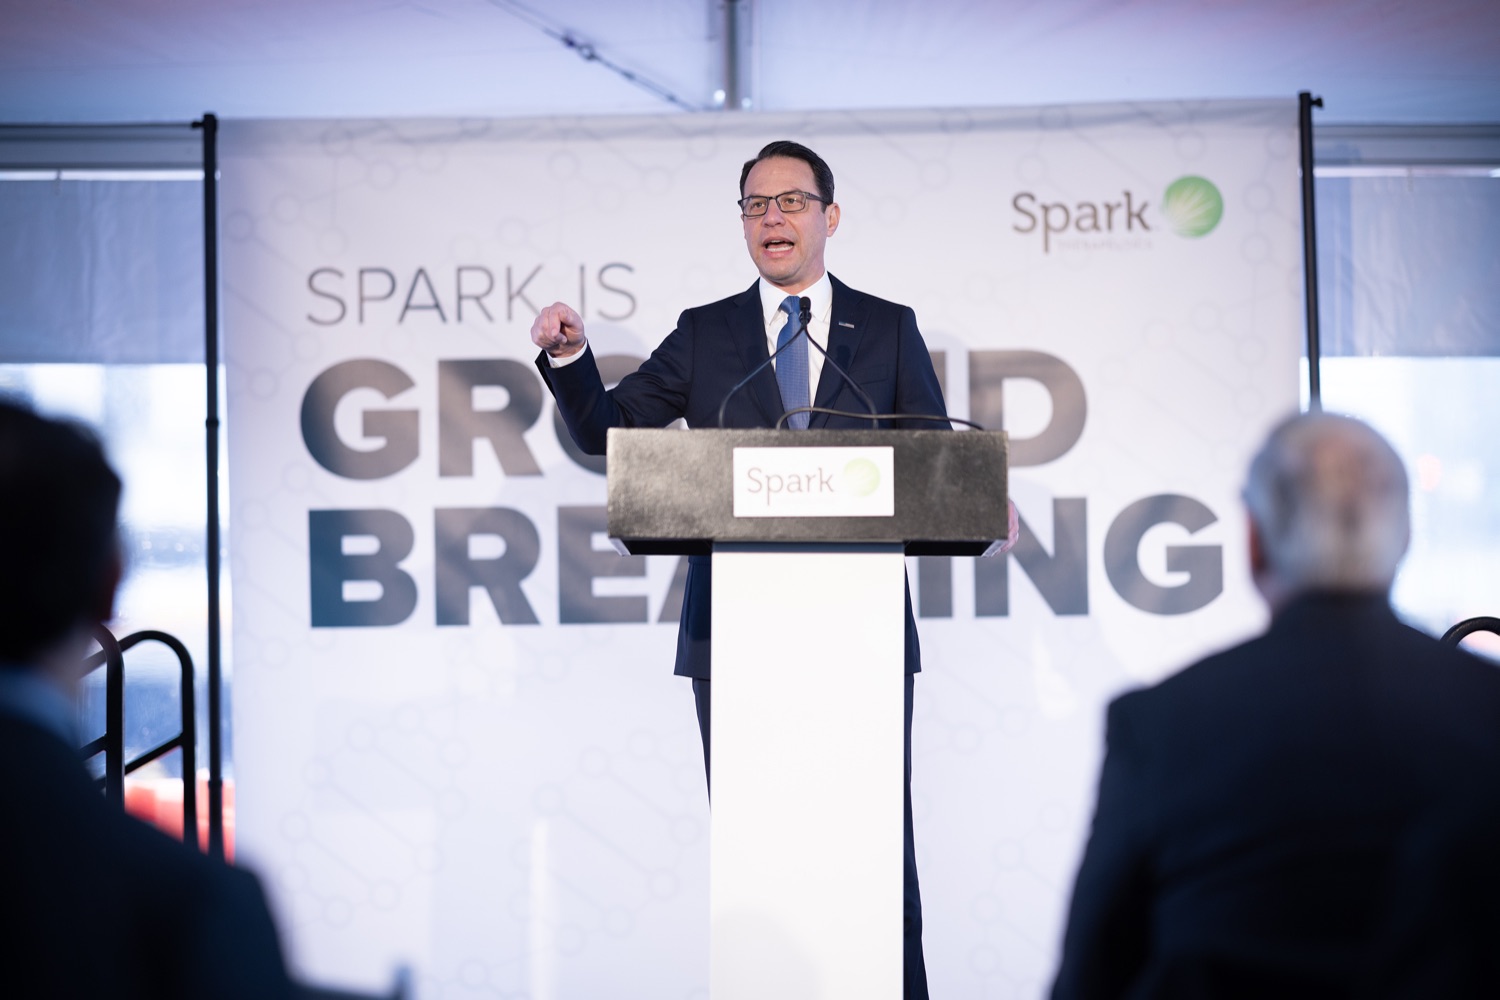 Pennsylvania Governor Josh Shapiro speaks with the press.   Pennsylvania Governor Josh Shapiro participates in a groundbreaking for Spark Therapeutics at the future site of their new building, at 30th and Chestnut streets.  FEBRUARY 28, 2023 - PHILADELPHIA, PA<br><a href="https://filesource.amperwave.net/commonwealthofpa/photo/22728_gov_spark_dz_0003.JPG" target="_blank">⇣ Download Photo</a>